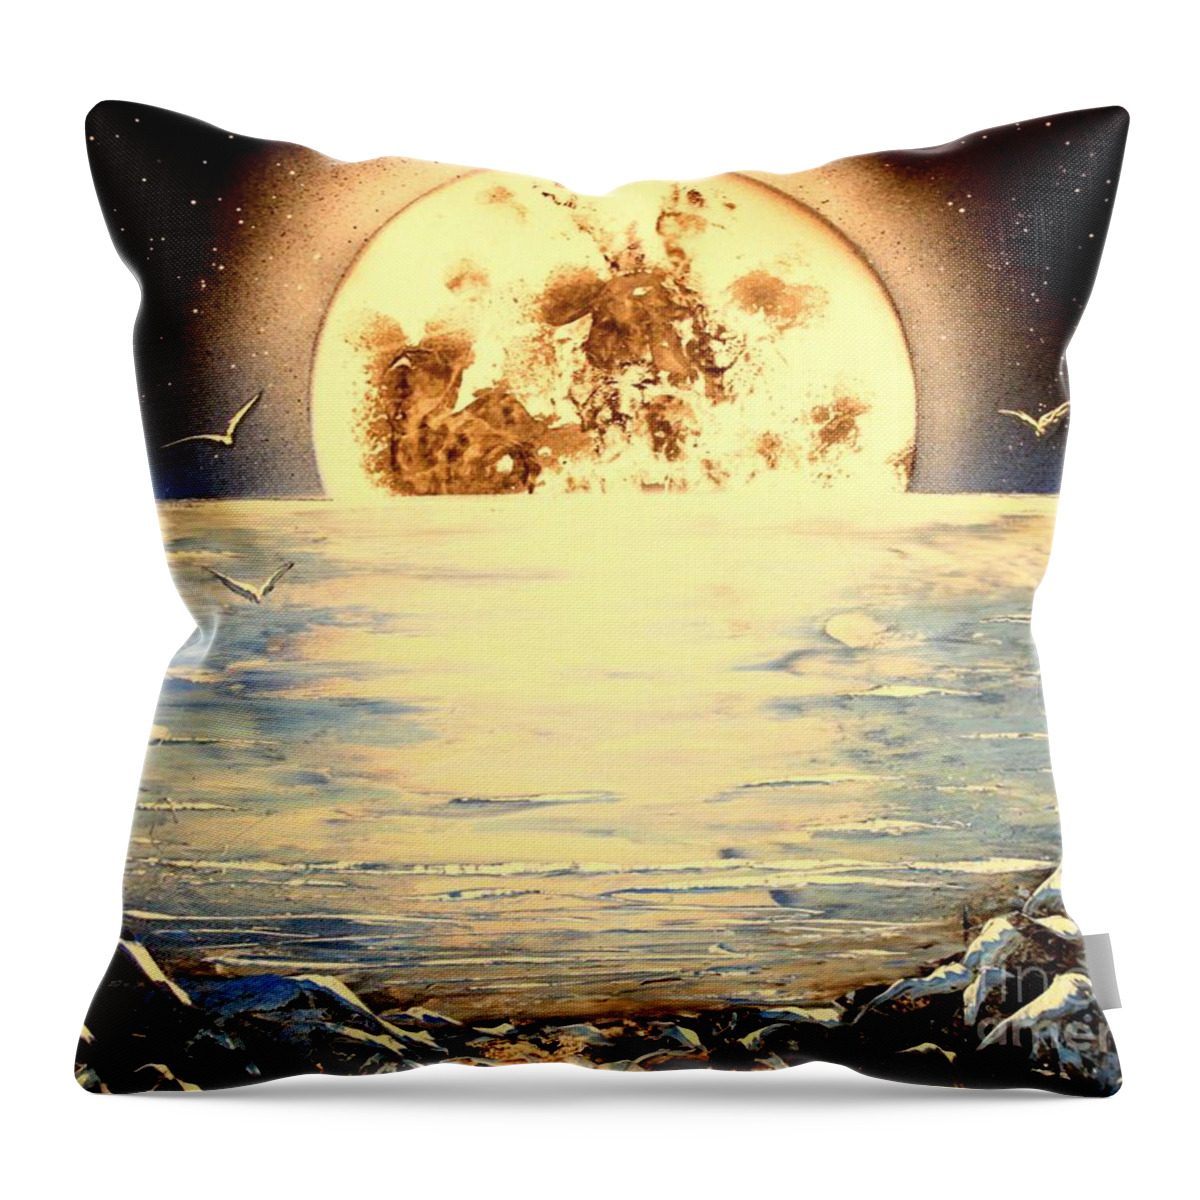 Moon Throw Pillow featuring the painting Bad Moon Rising by Greg Moores